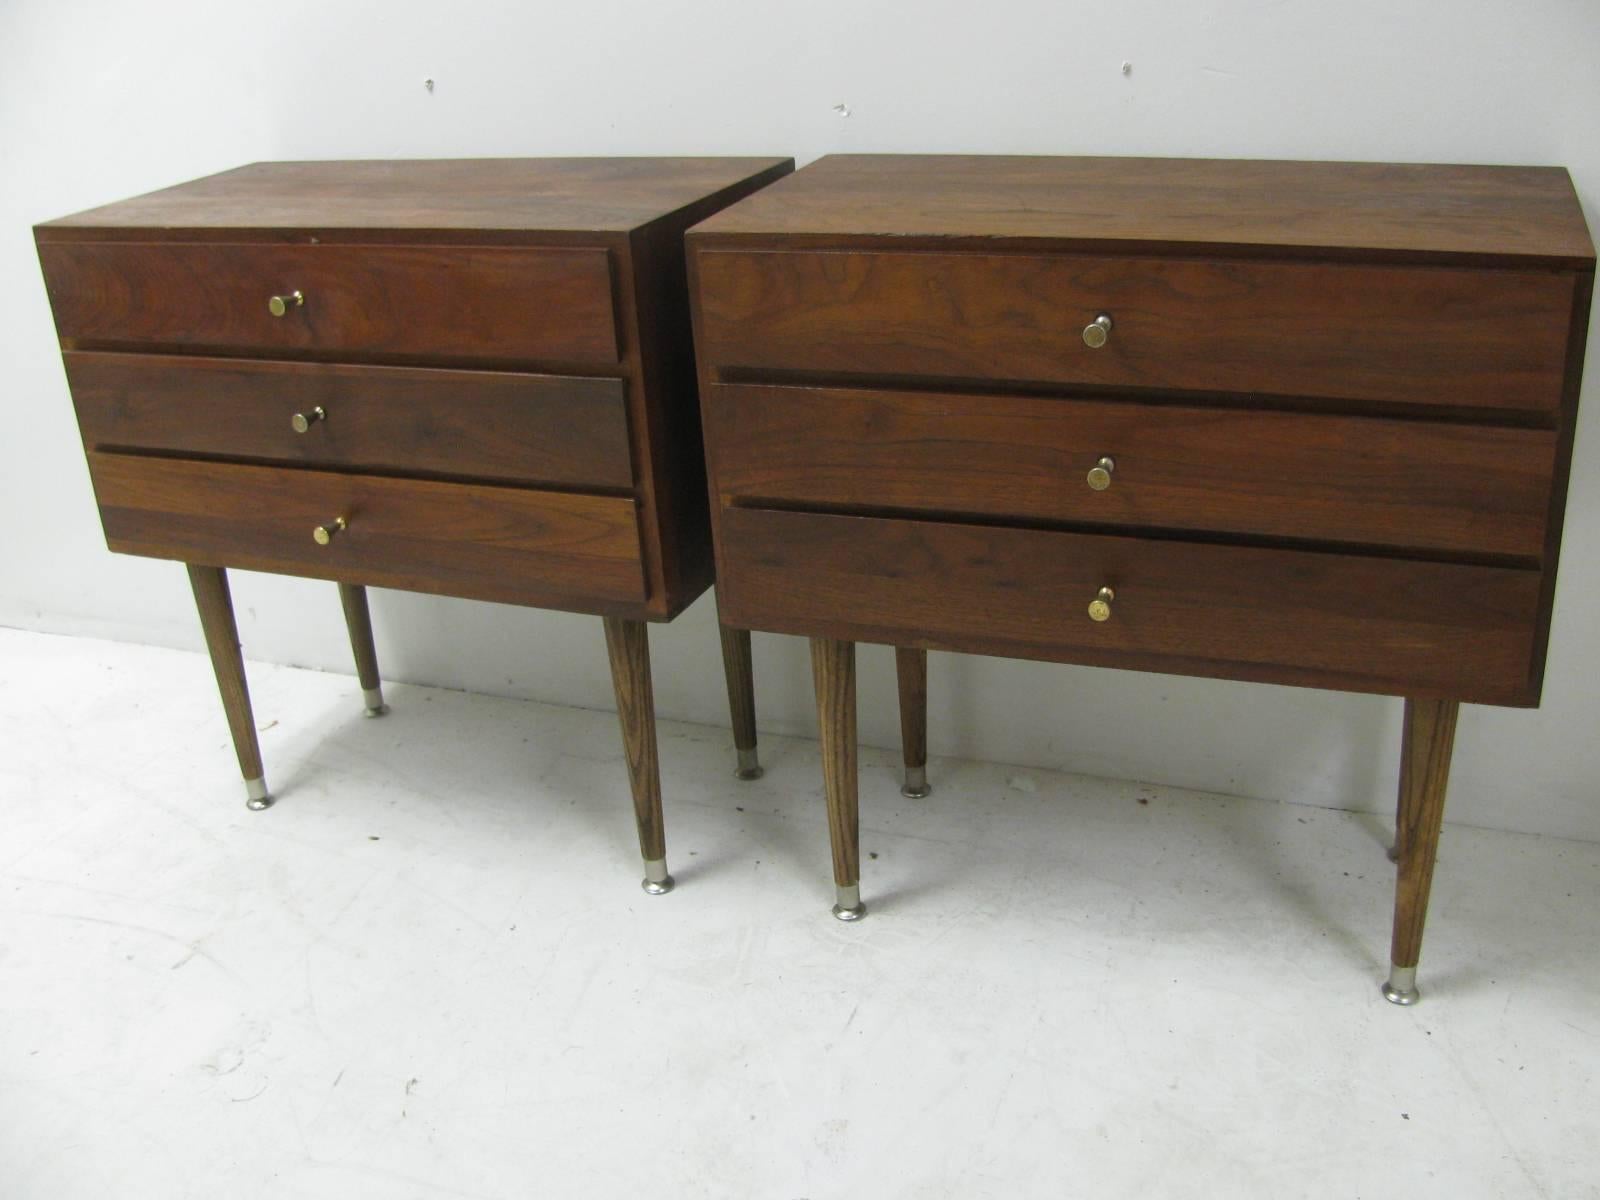 Fabulous pair of Walnut three drawer night tables with nickel pulls. Simple and elegant square lines, with solid walnut. Suitable for the living area as well as the bedroom.